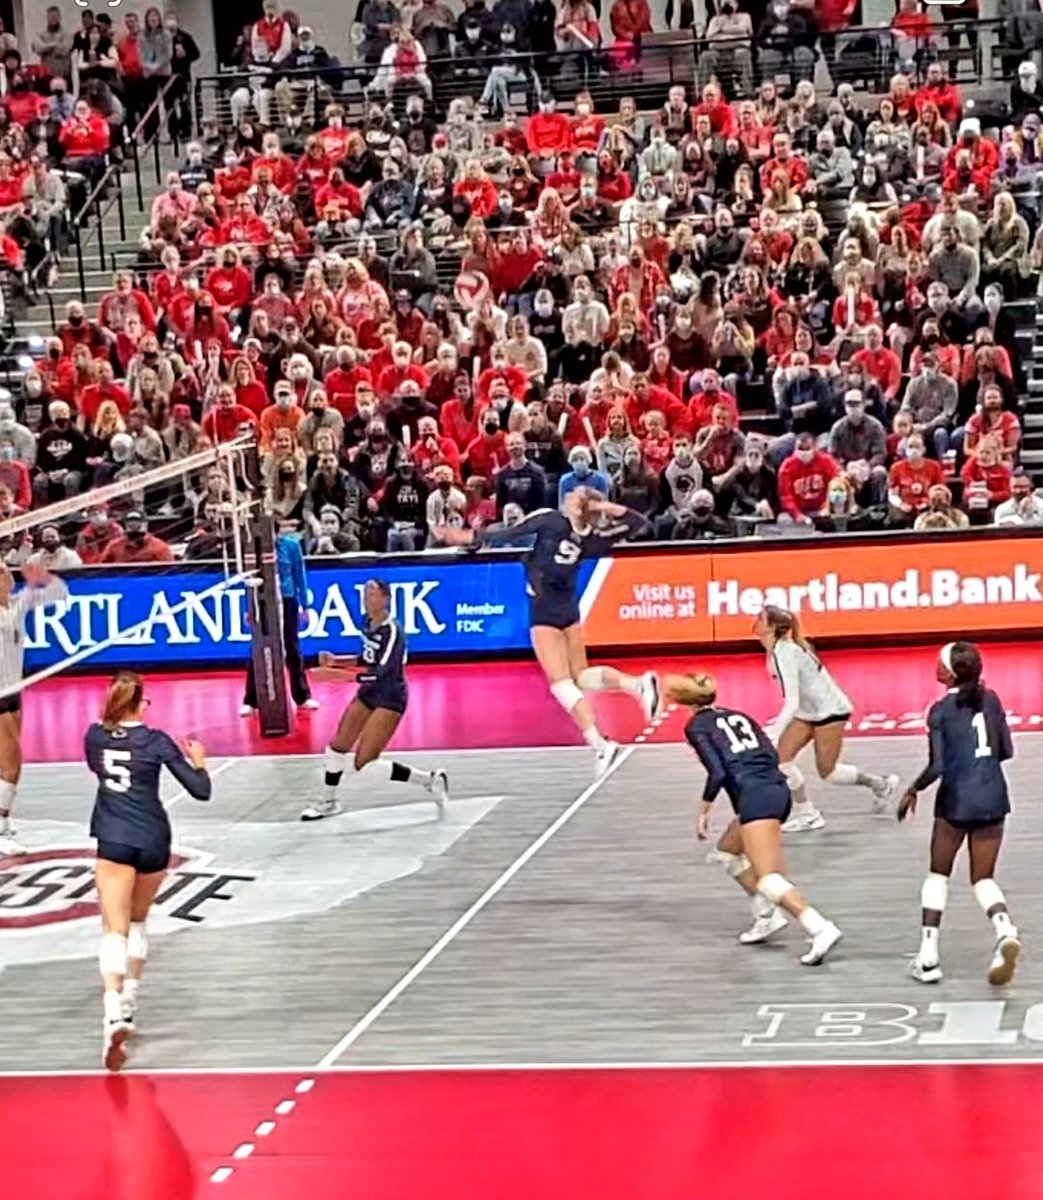 When Jonni Parker is in Columbus taking on the Buckeyes, you make sure to grab tickets to watch her in action! She's a beast! 💙🏐💙#EastPride #PennStateVolleyball